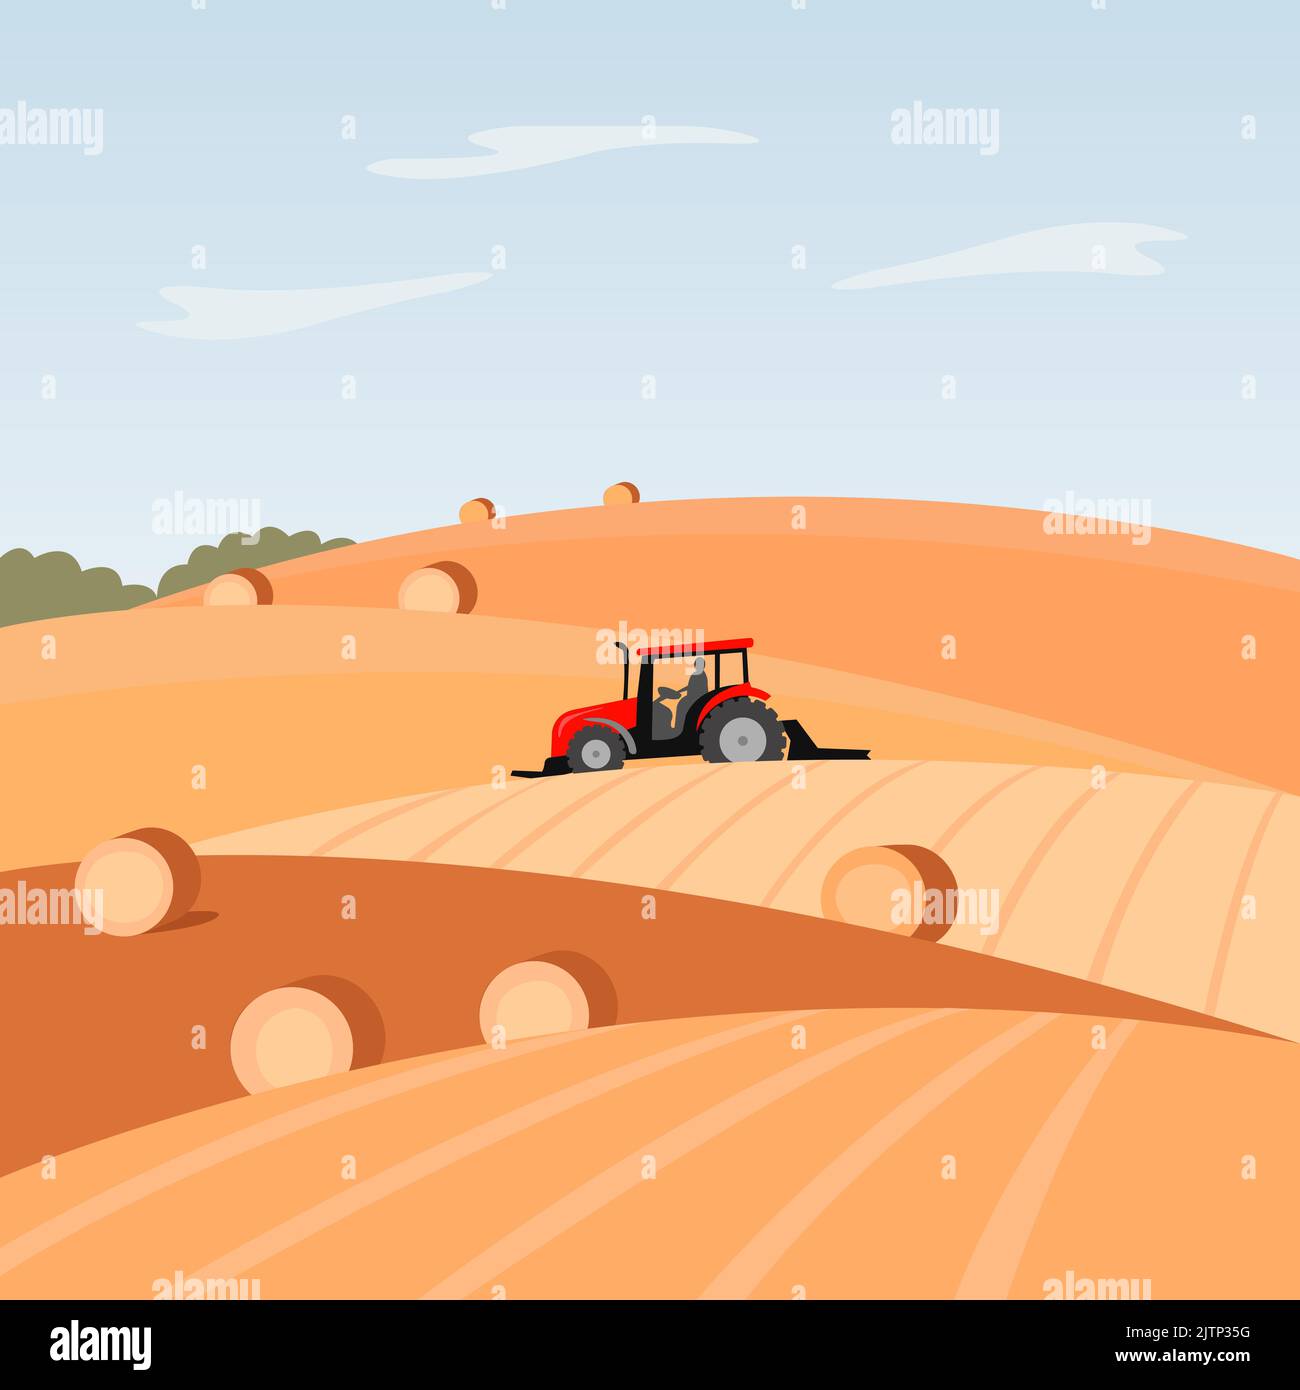 Agriculture industry, farming field with a tractor. Rural landscape with copy space for text. Vector illustration. Stock Vector